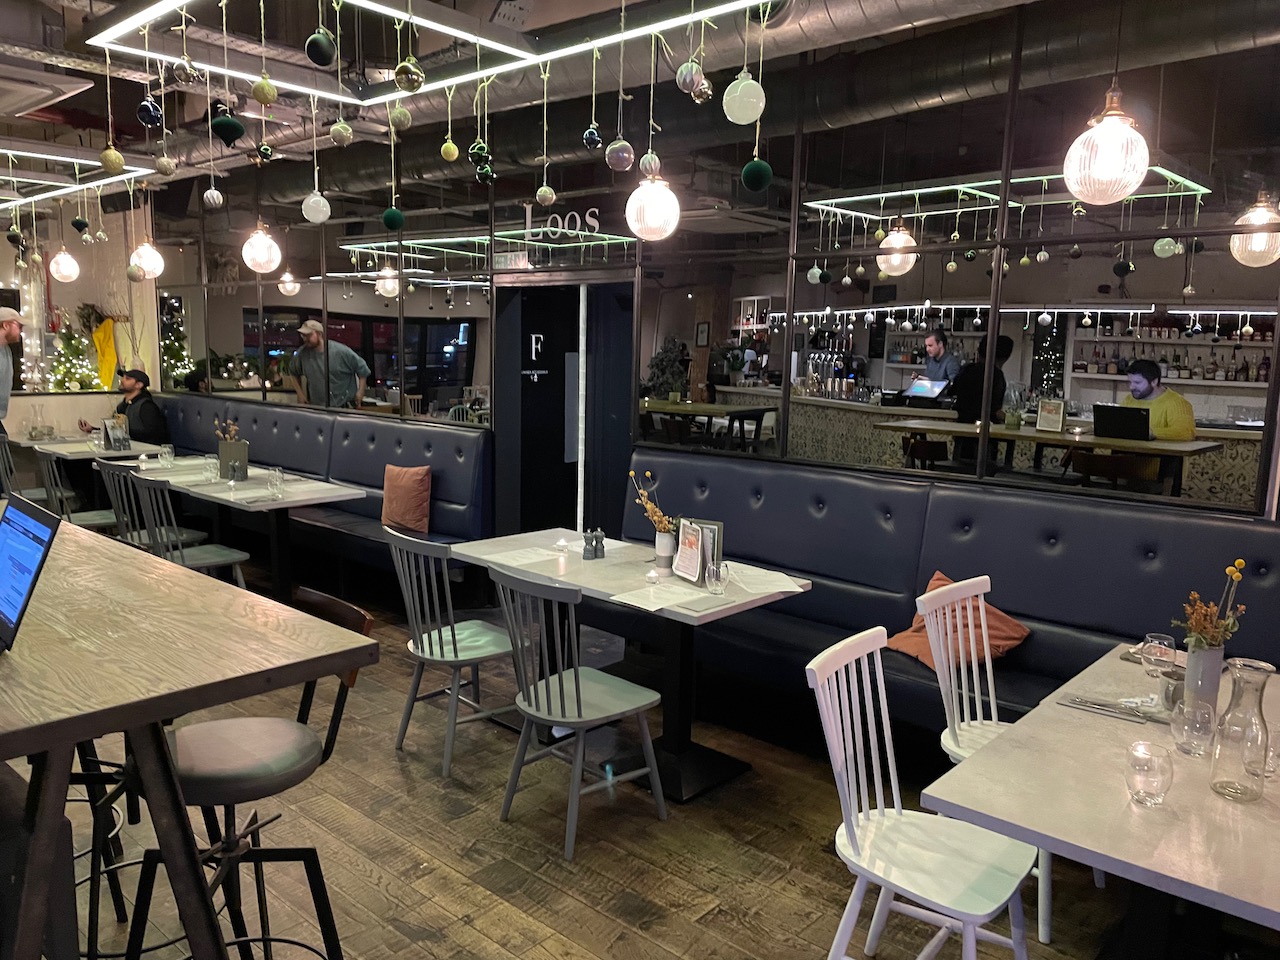 sw16 bar and kitchen - atmosphere